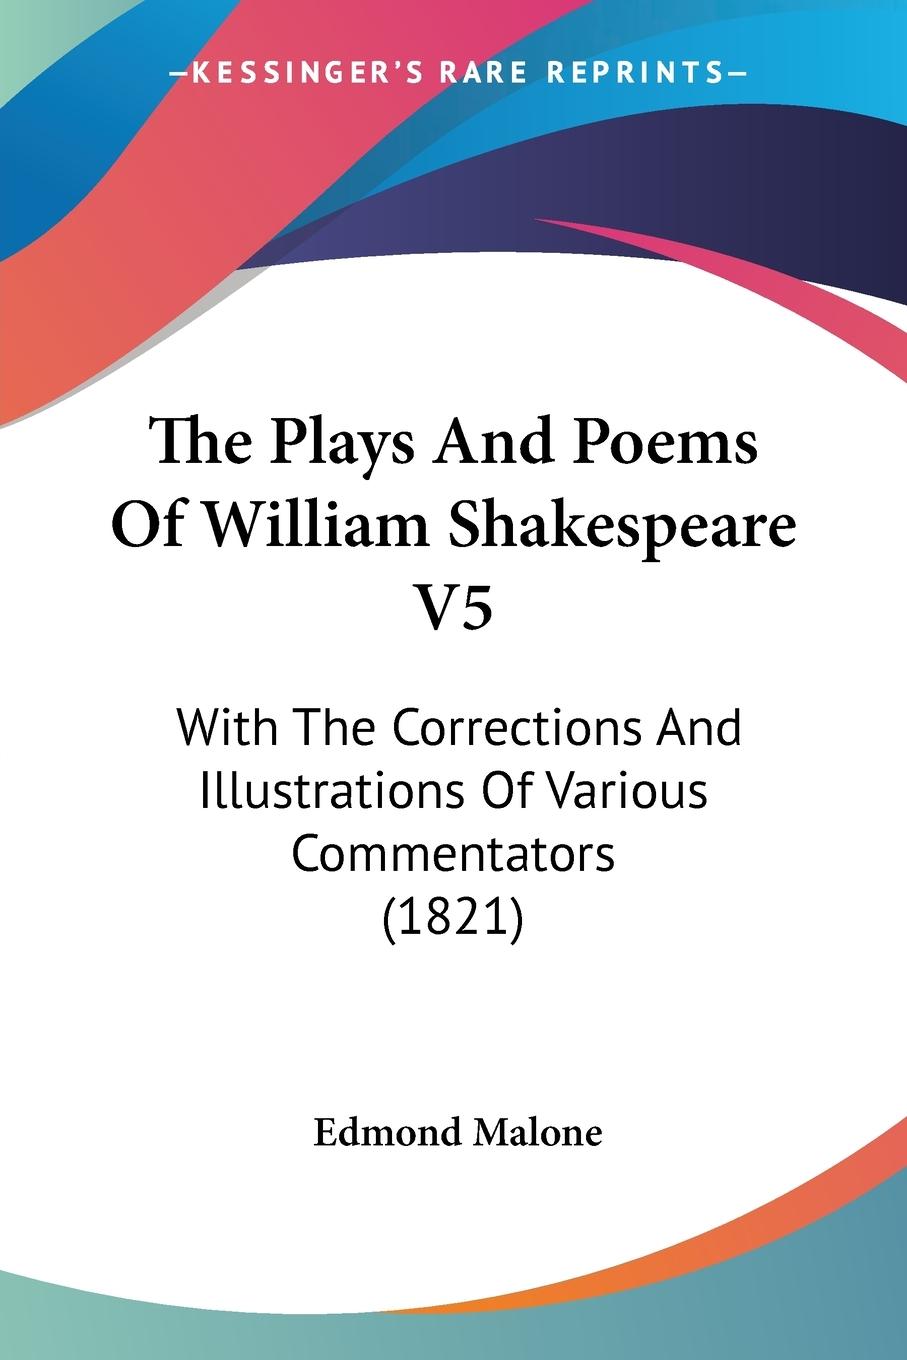 The Plays And Poems Of William Shakespeare V5 - Malone, Edmond